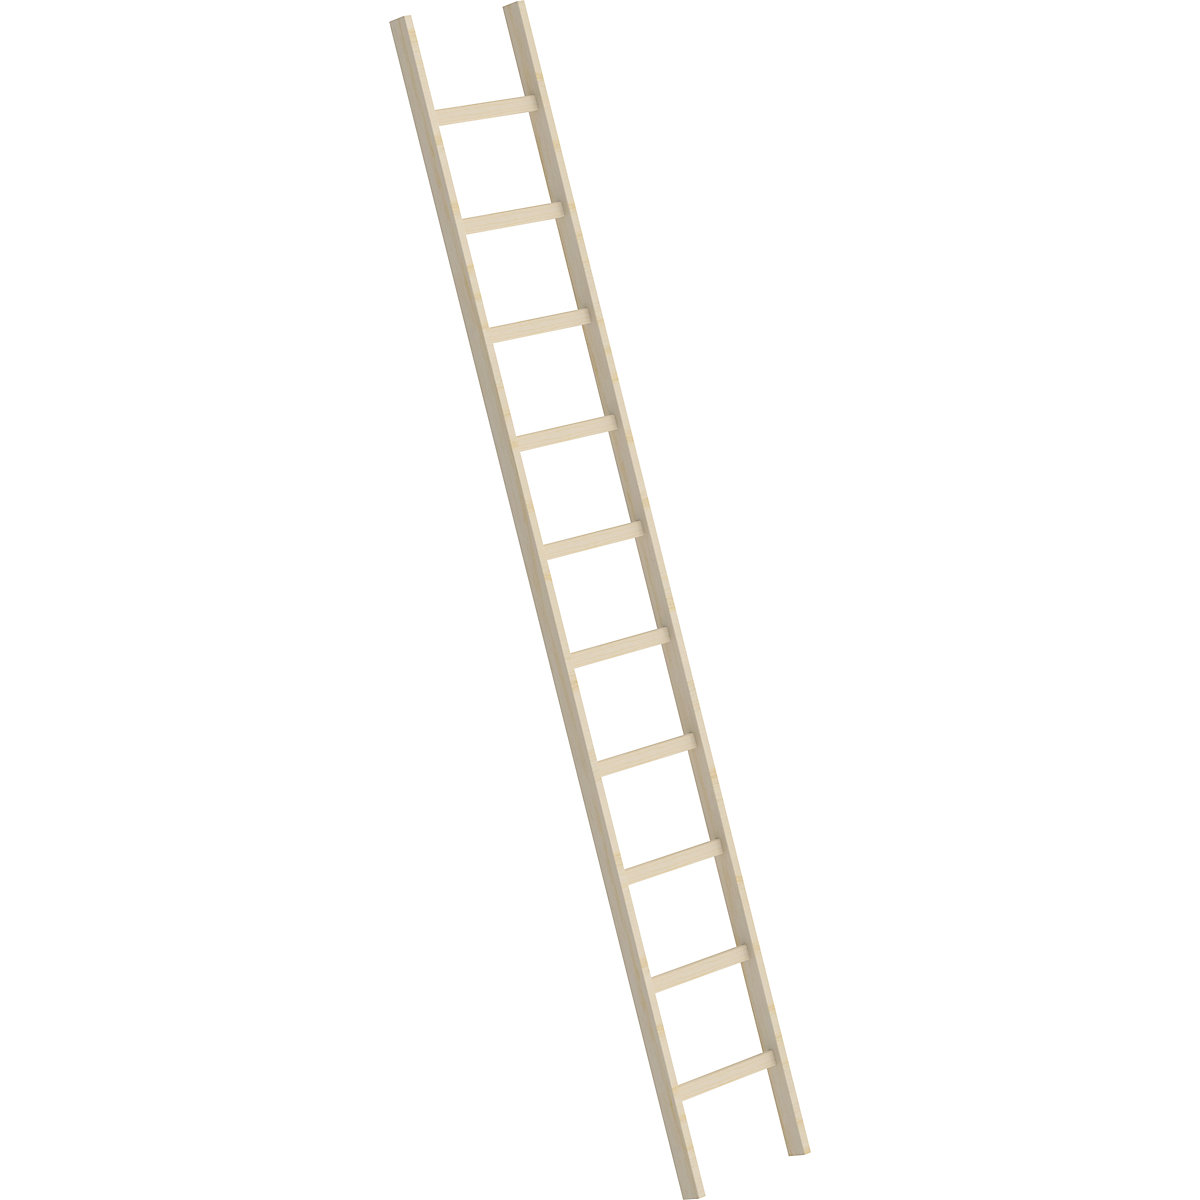 Wooden lean to ladder – MUNK, with rungs, 10 rungs-5